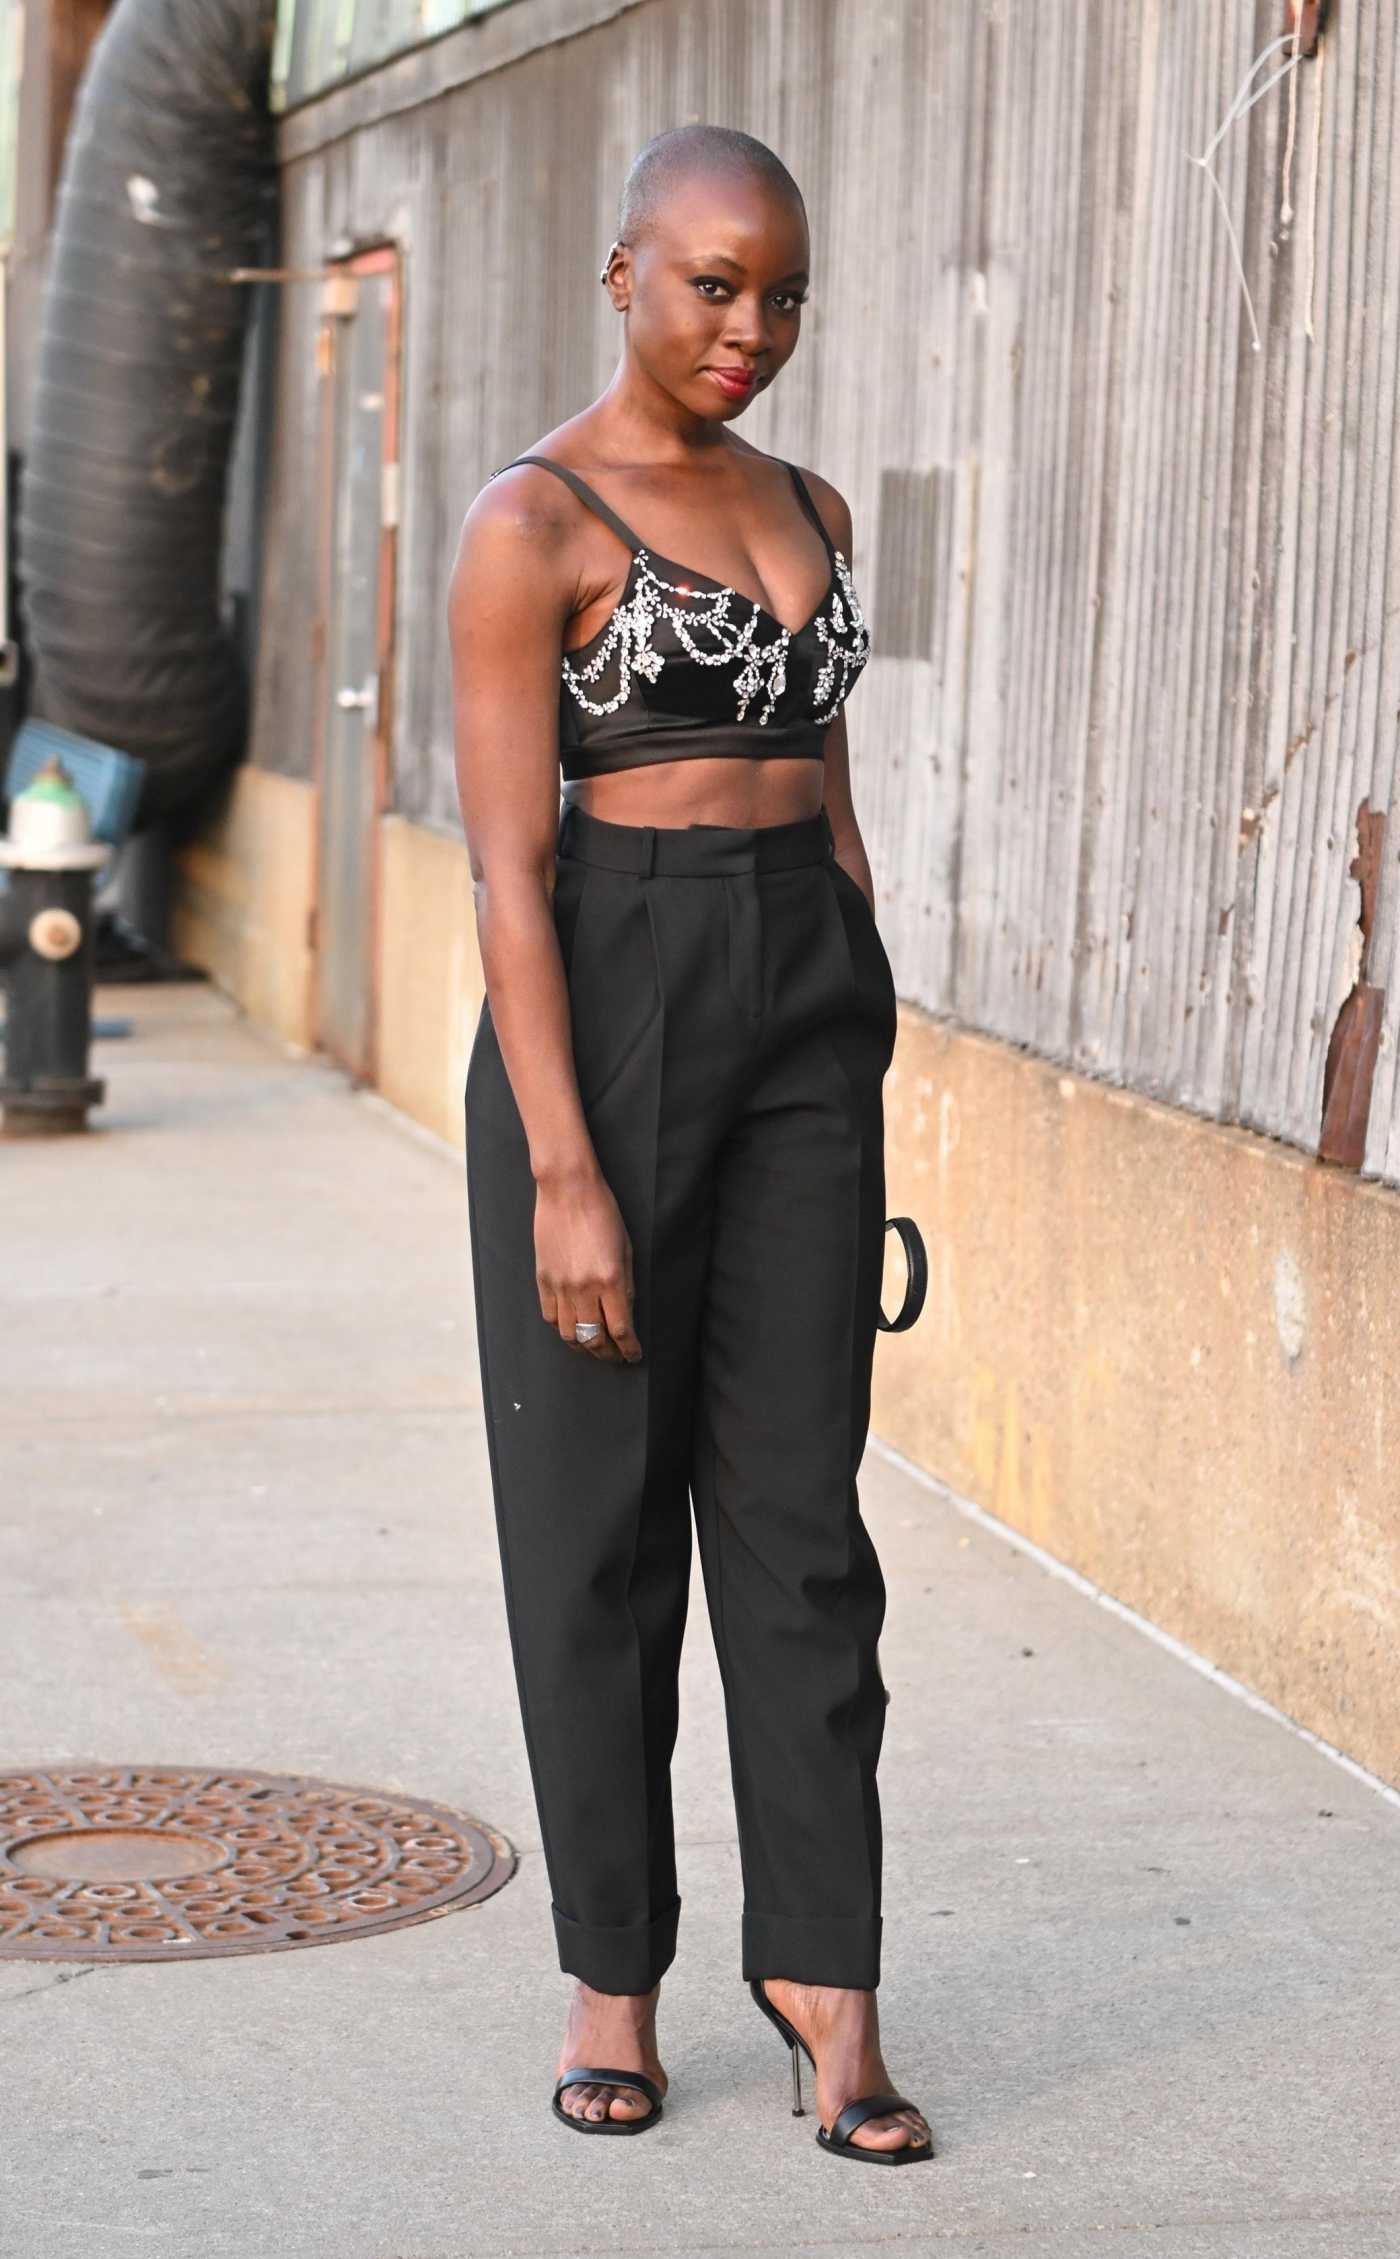 Danai Gurira in a Black Pants Arrives at the Alexander McQueen Fashion Show in New York 03/15/2022